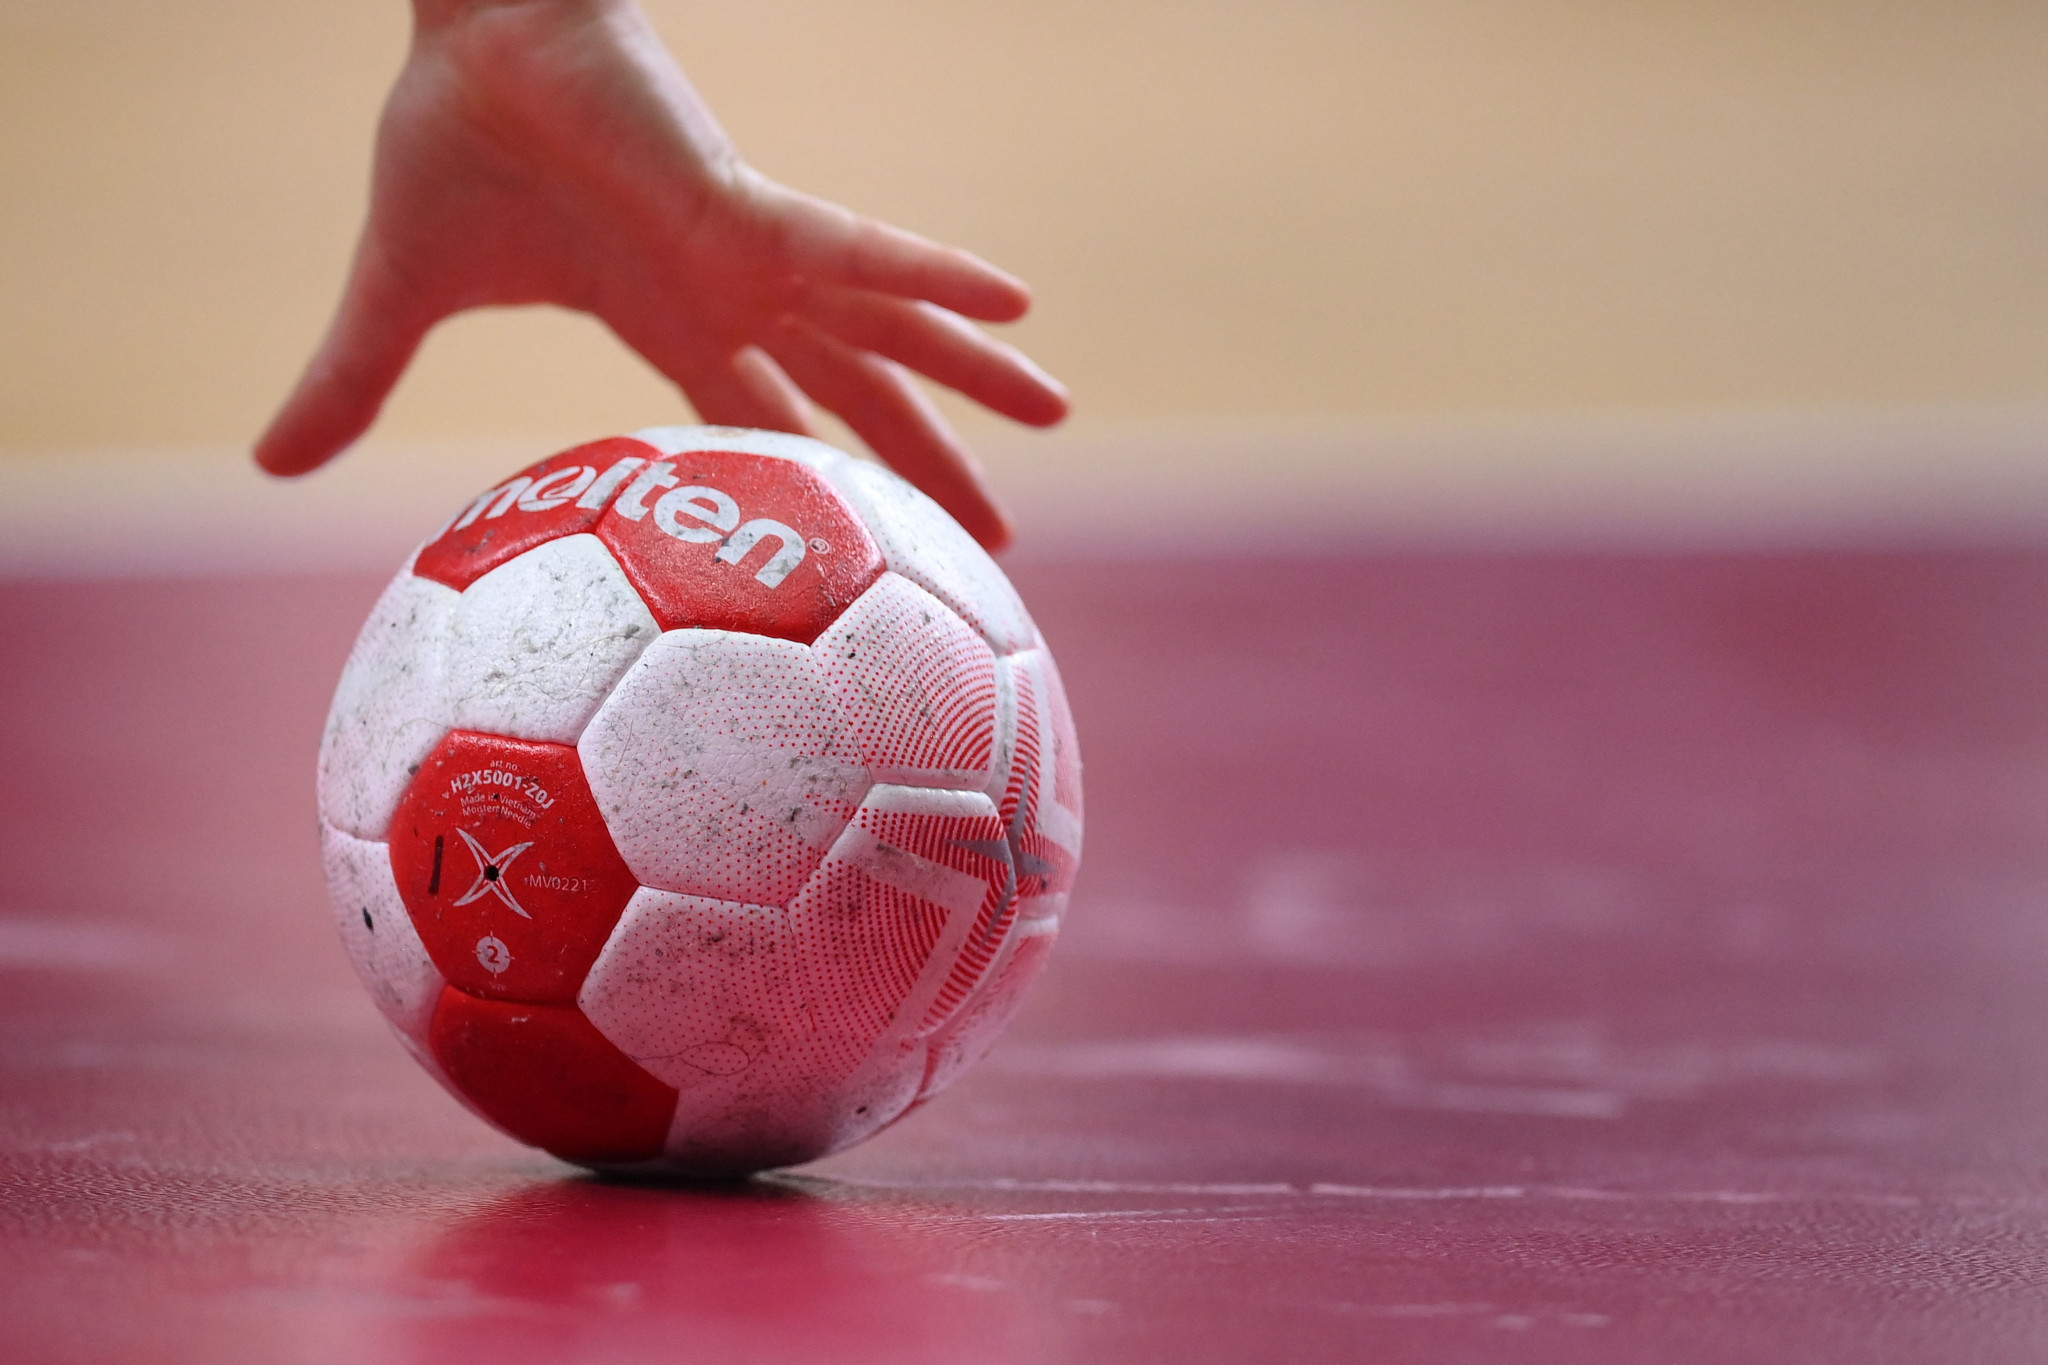 Handball venues confirmed for Paris 2024 with arenas in Lille and the capital